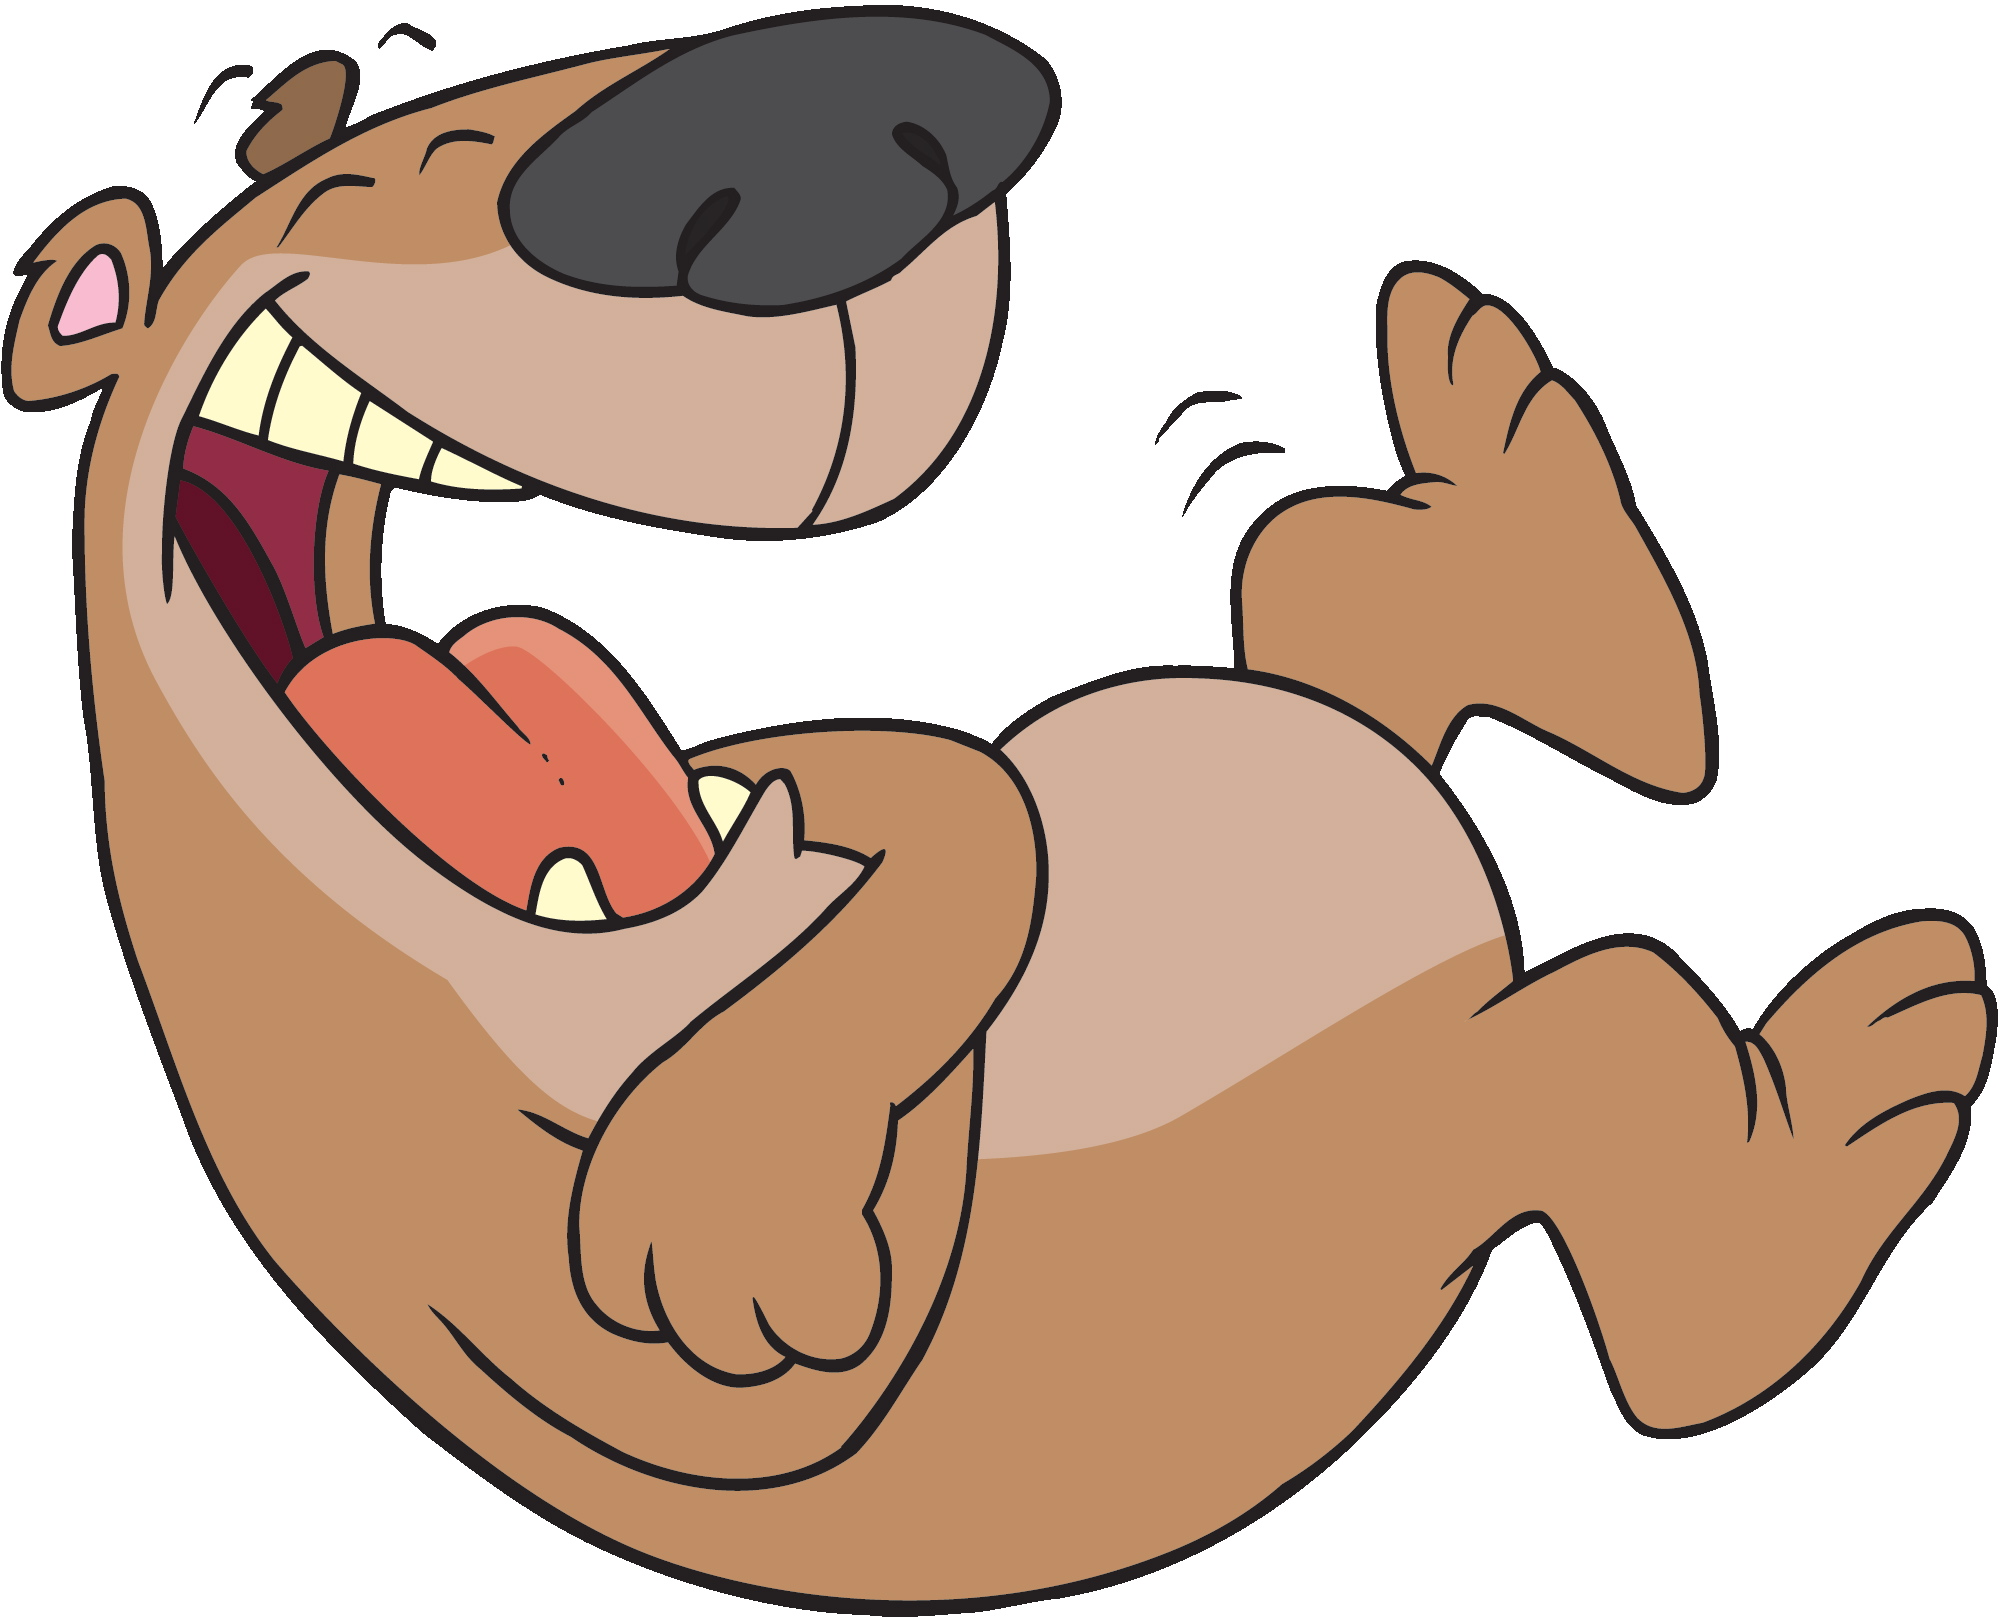 belly laugh clipart - Clip Art Library